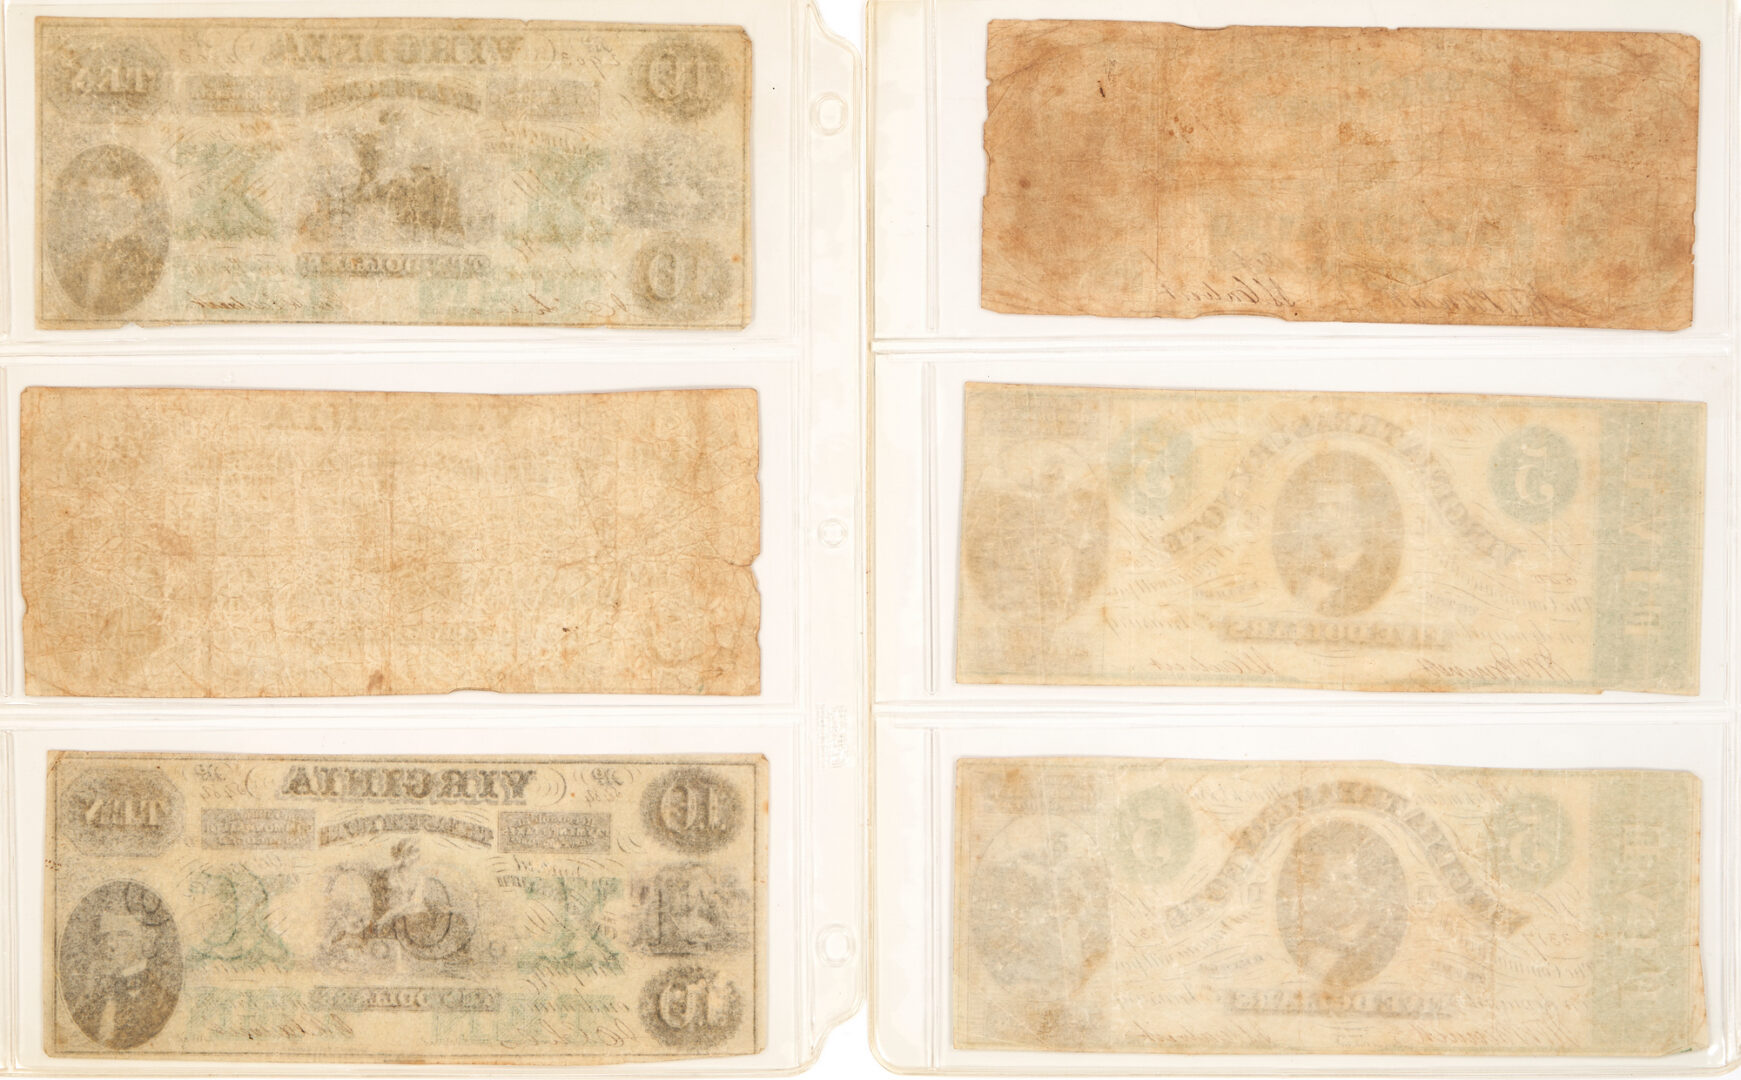 Lot 663: Grouping of Confederate Currency, Pre Civil War Obsolete Currency, U.S. Currency, 40 items